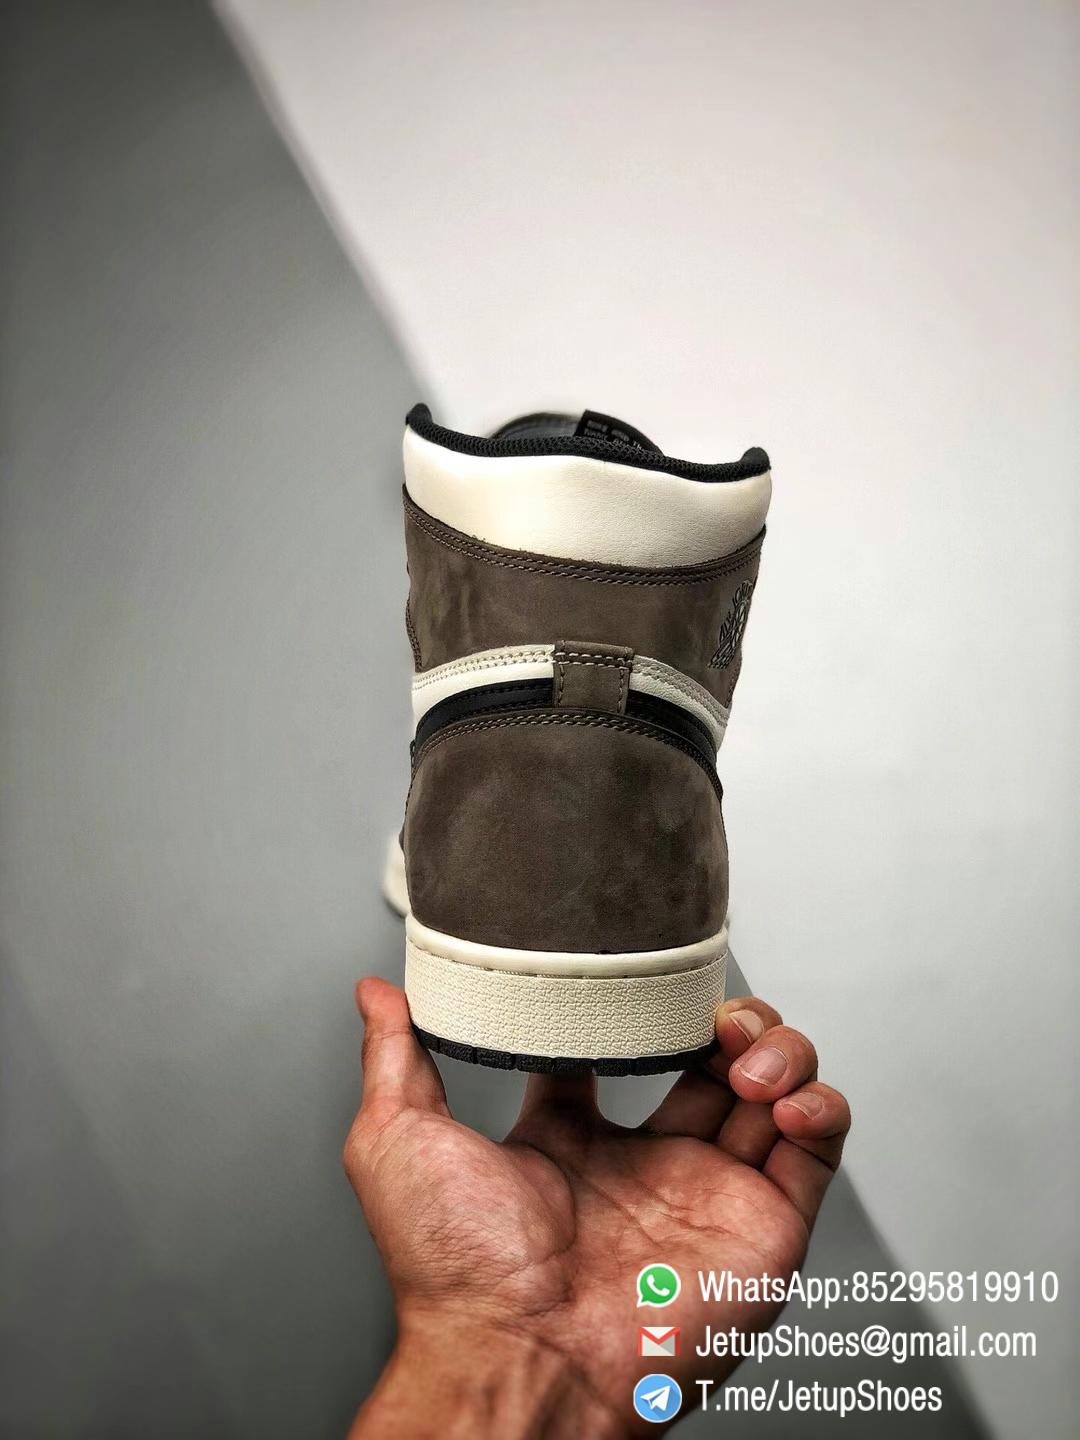 Best Replica Air Jordan 1 Retro High OG Dark Mocha Off white Leather Base and Black Overylays Top Quality Sneakers 09